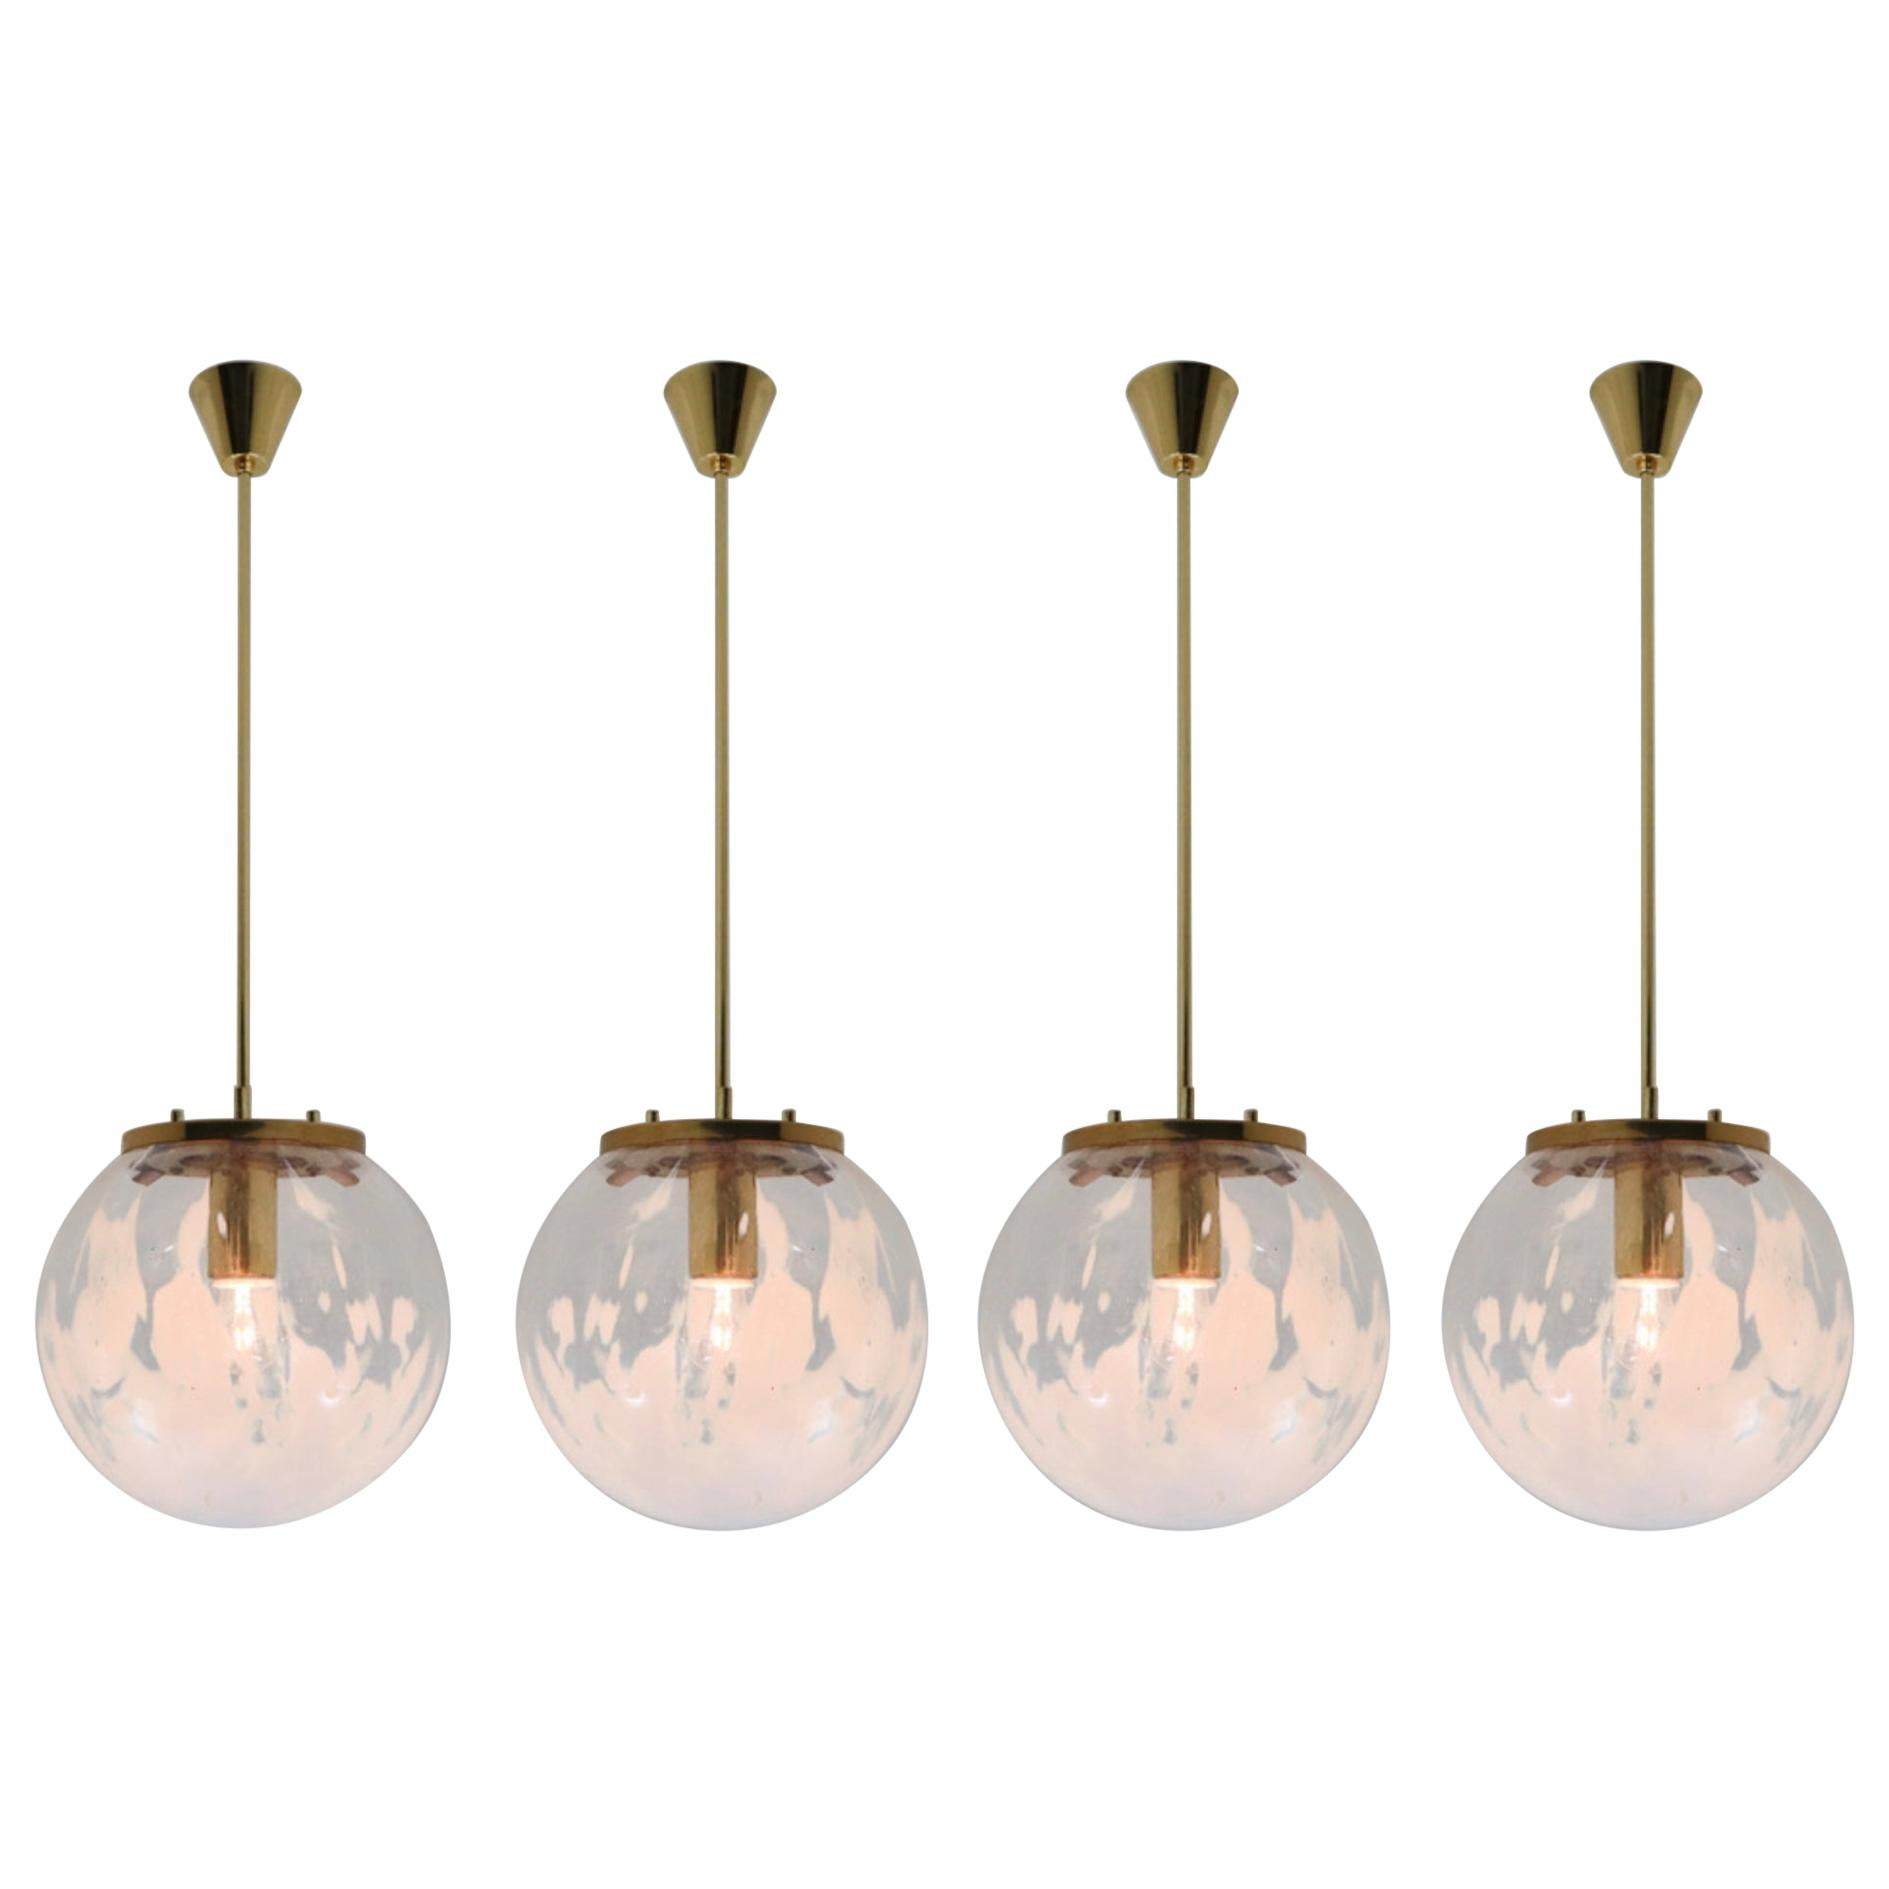 Midcentury Pendants in Brass and Art-Glass with White Streaks, Austria, 1960s